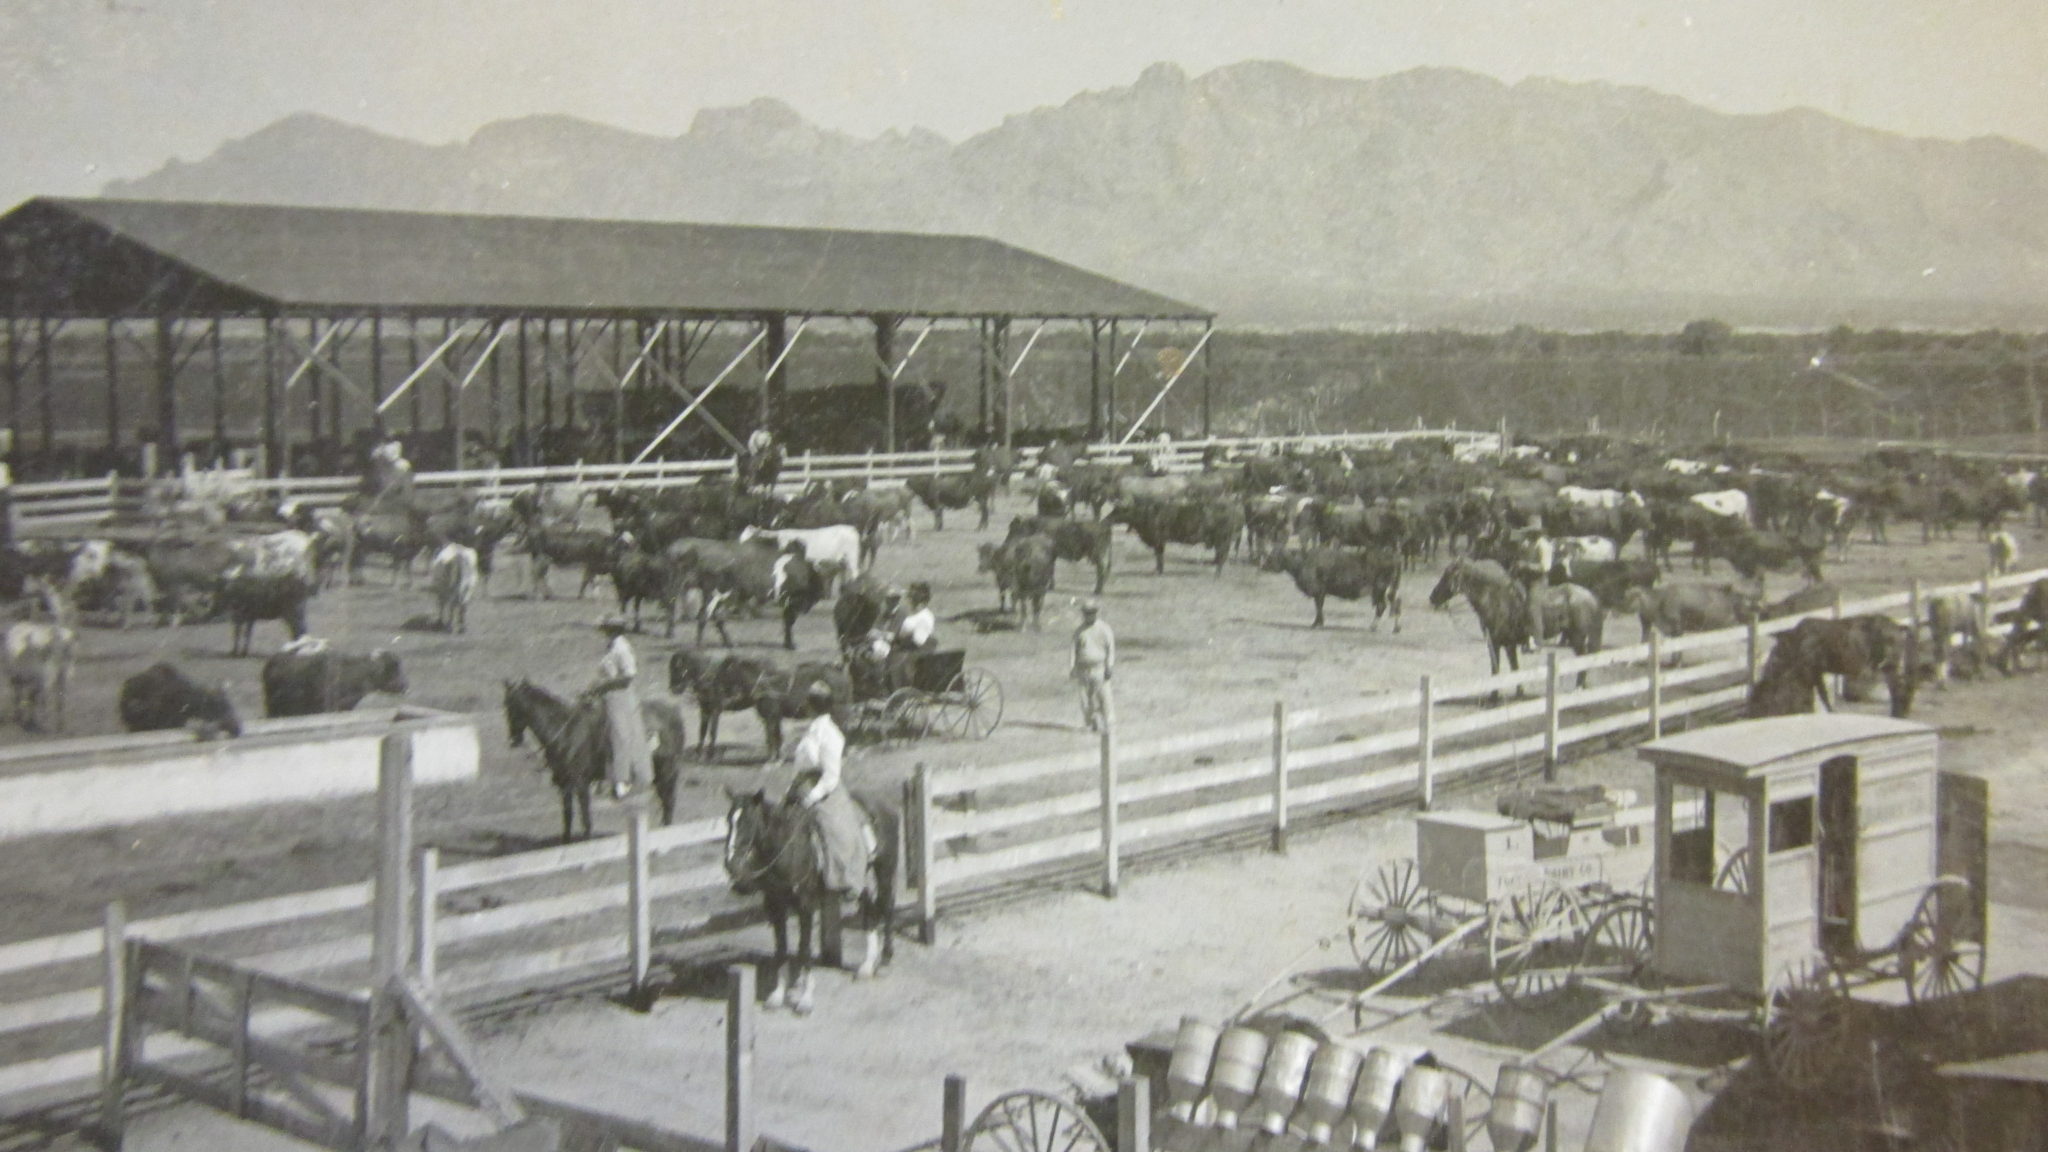 Tucson Rodeo Ground with Santa Catalina Mountains in background